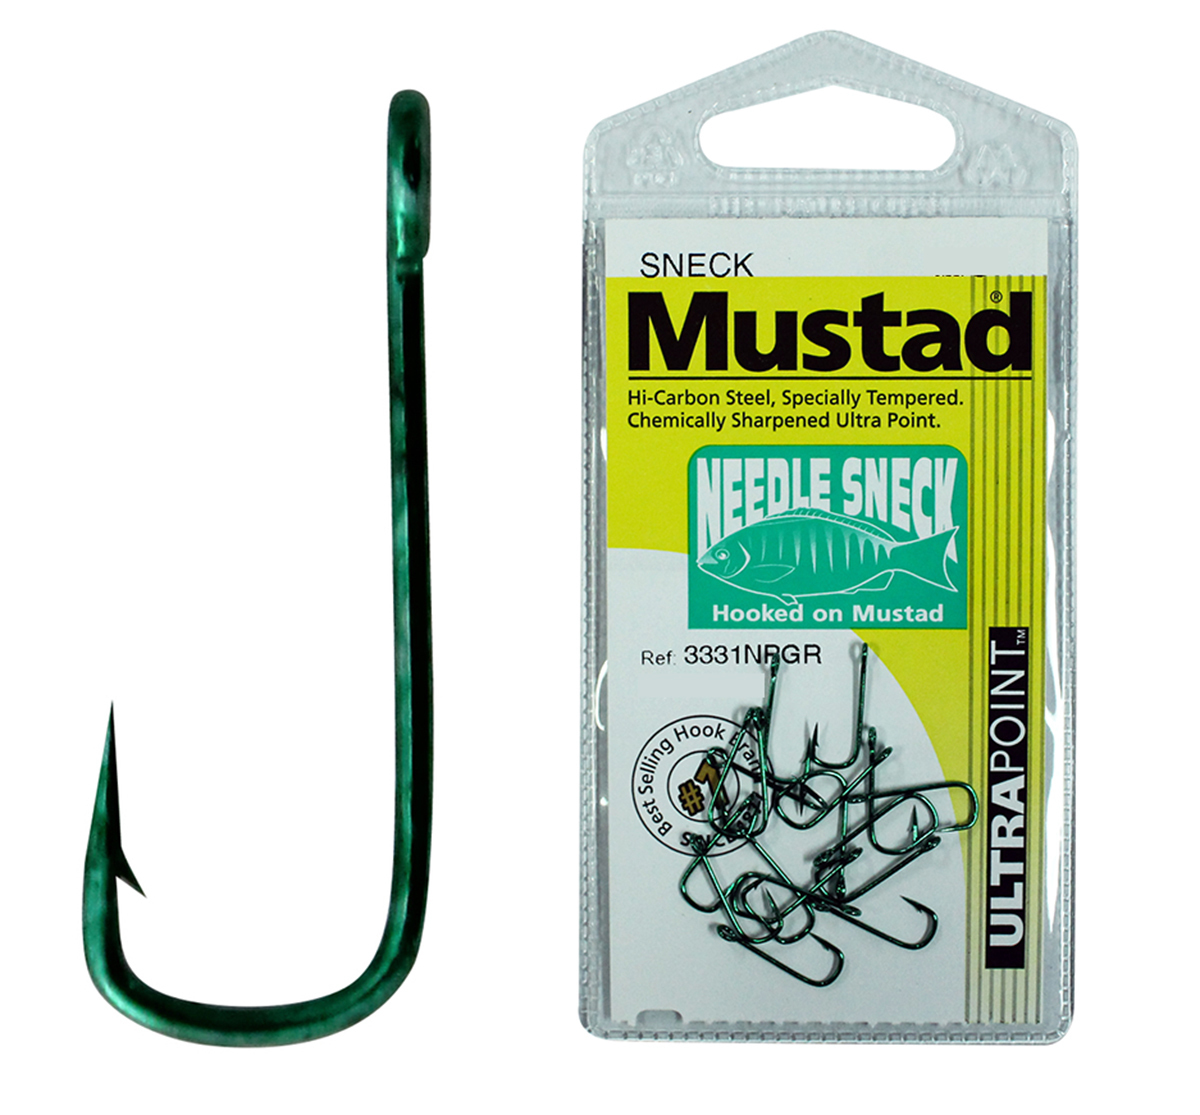 1 Packet of Mustad 3331NPGR Needle Sneck Weed Chemically Sharp Fishing Hooks